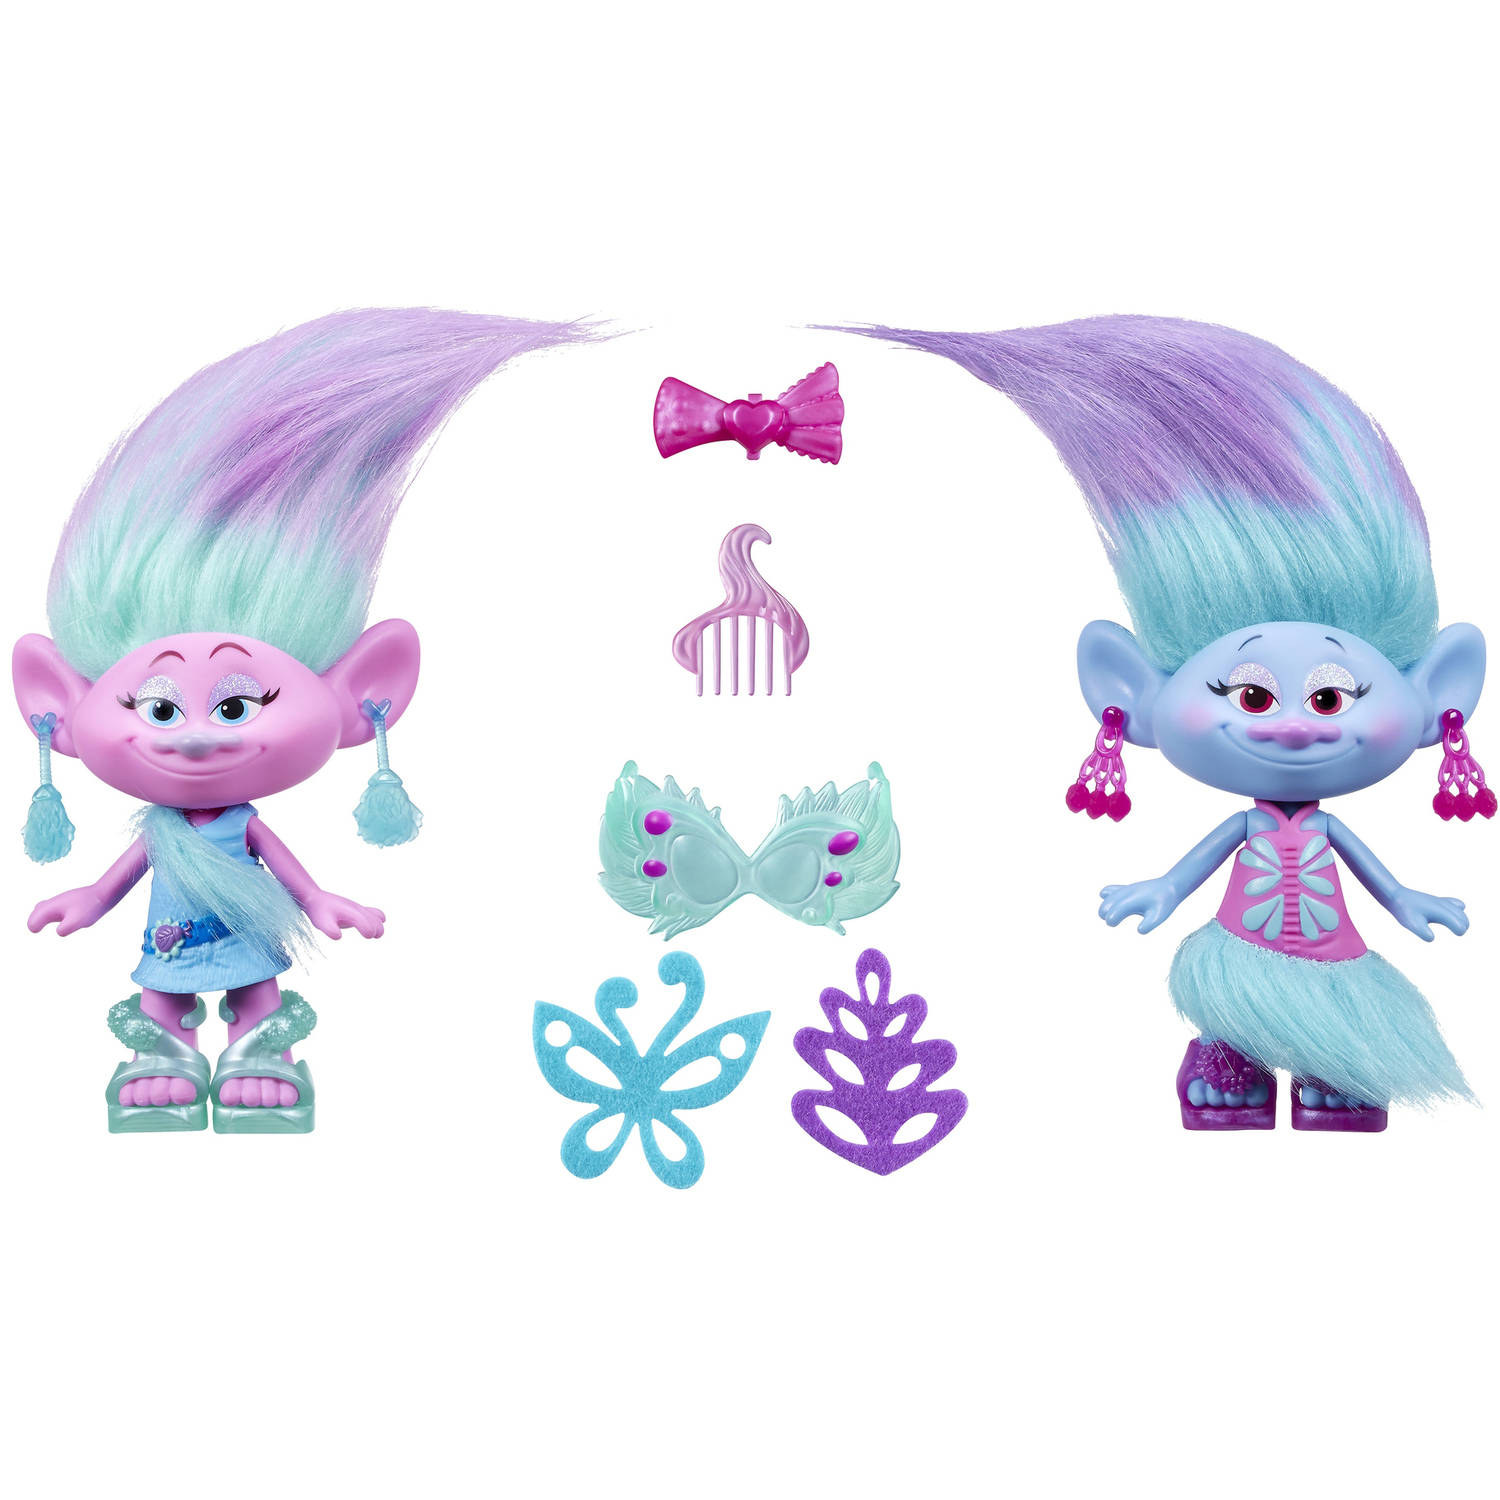 DreamWorks Trolls Satin and Chenille's Style Set - image 1 of 13